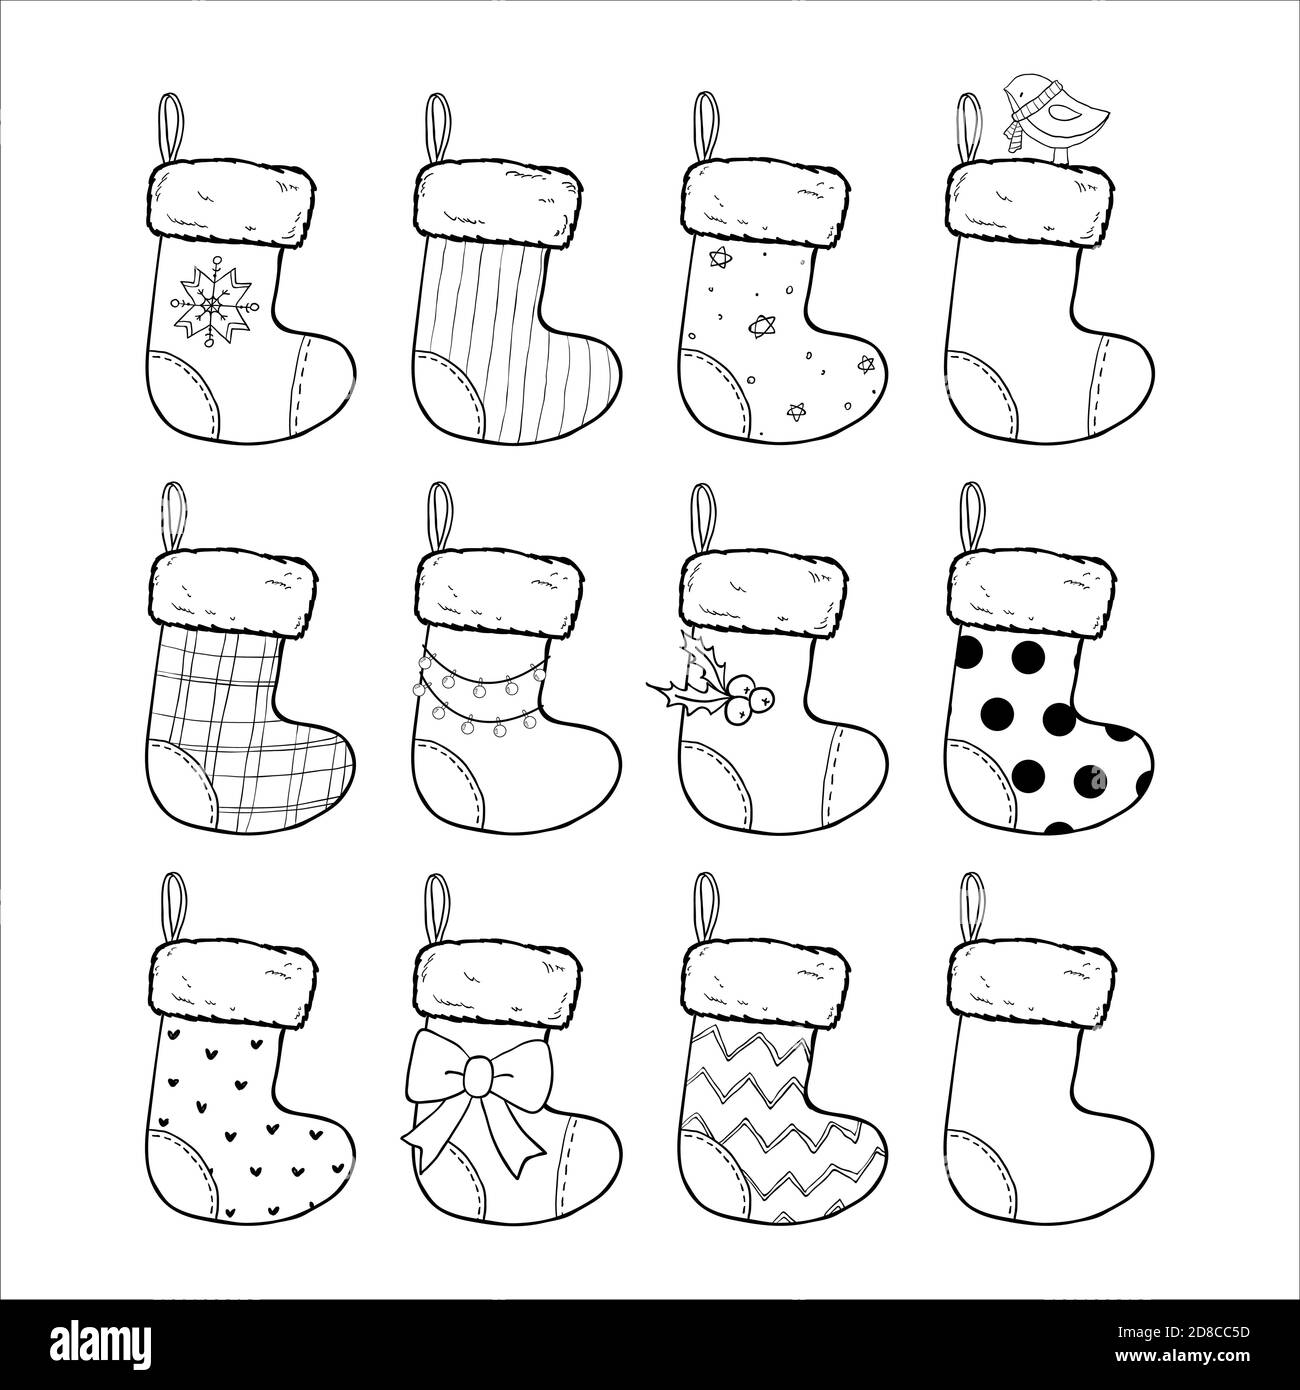 Christmas stockings set hand drawn vector illustration, black and white. Sock-shaped bags. Decorated winter socks, Saint Nicholas Day gifts Stock Vector